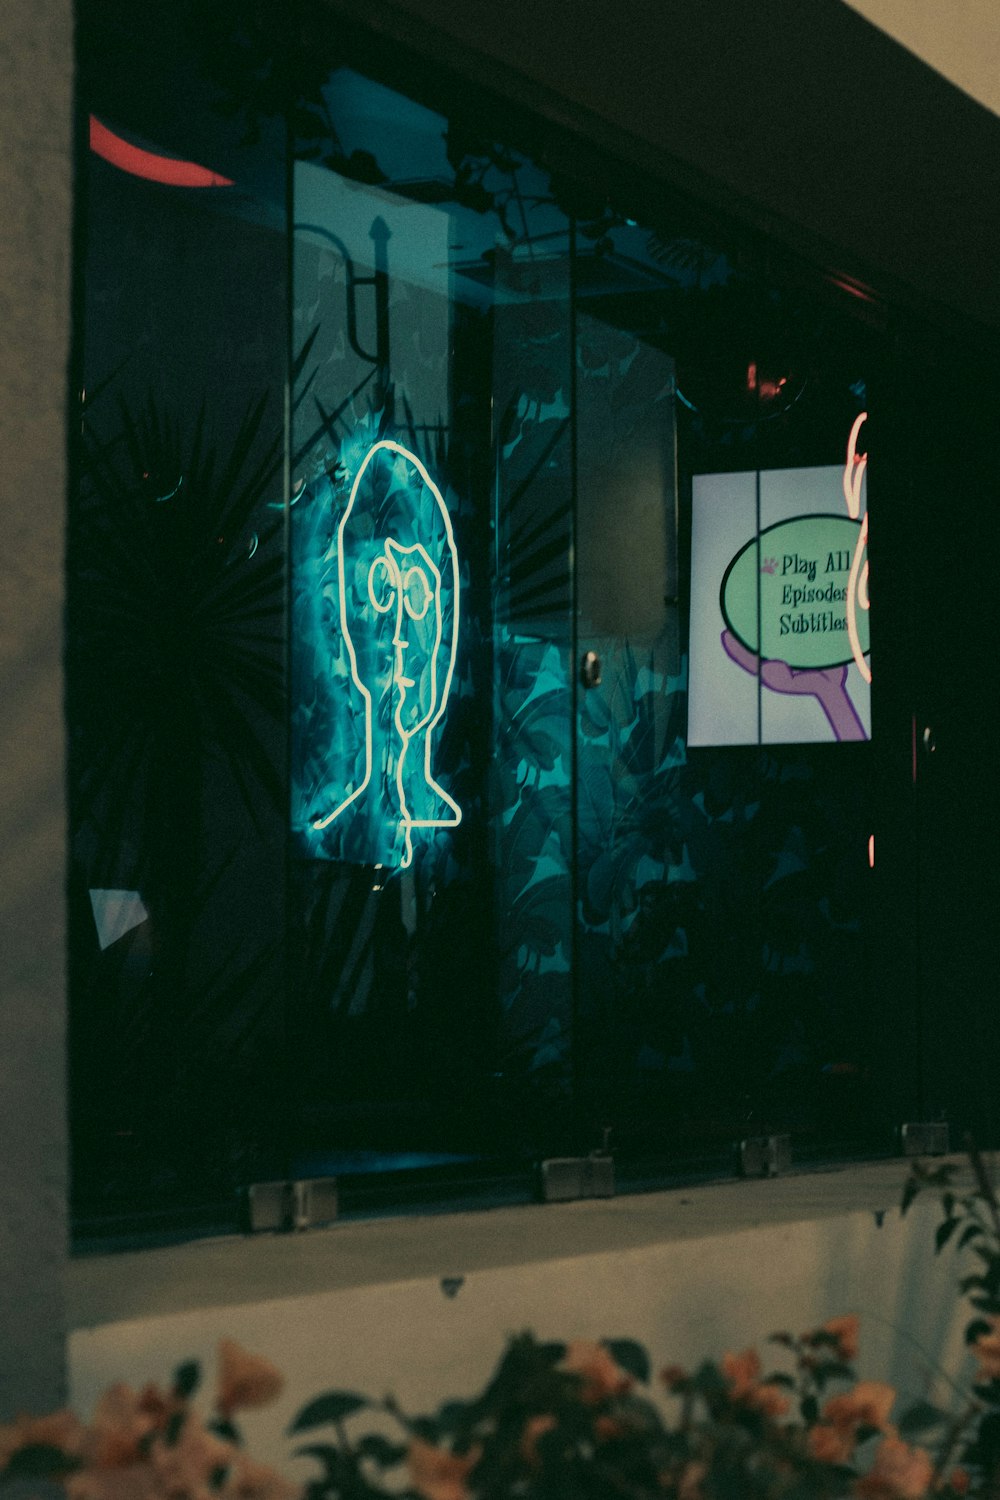 a neon sign in the window of a store